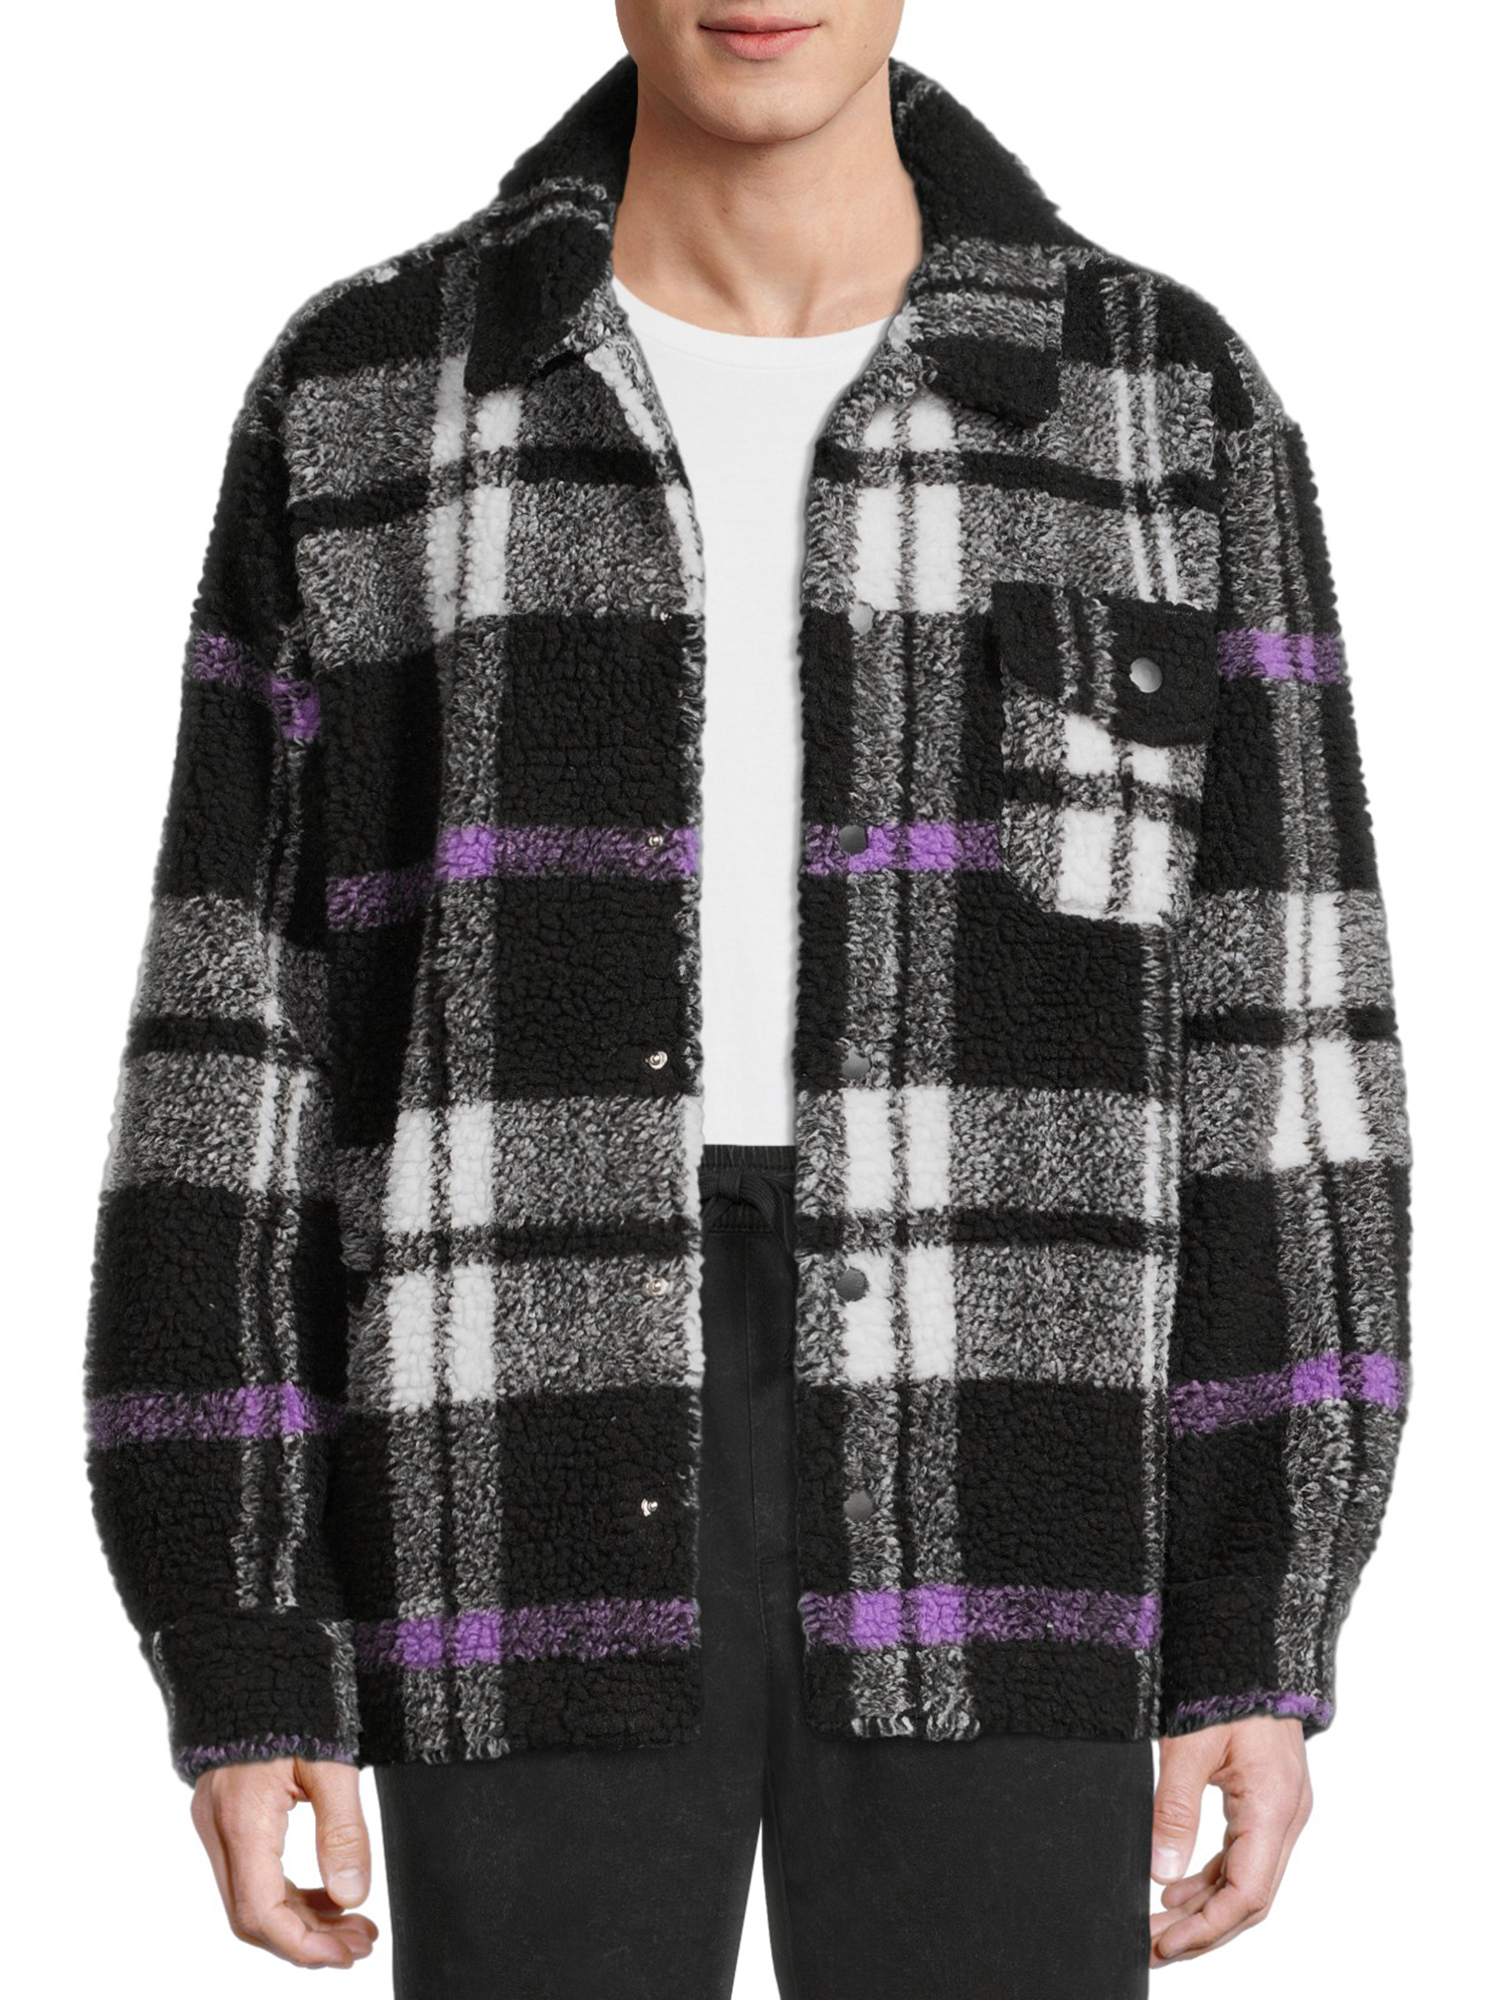 No Boundaries Men's and Big Men's Button-up Faux Sherpa Jacket, Sizes XS-3XL - image 1 of 5